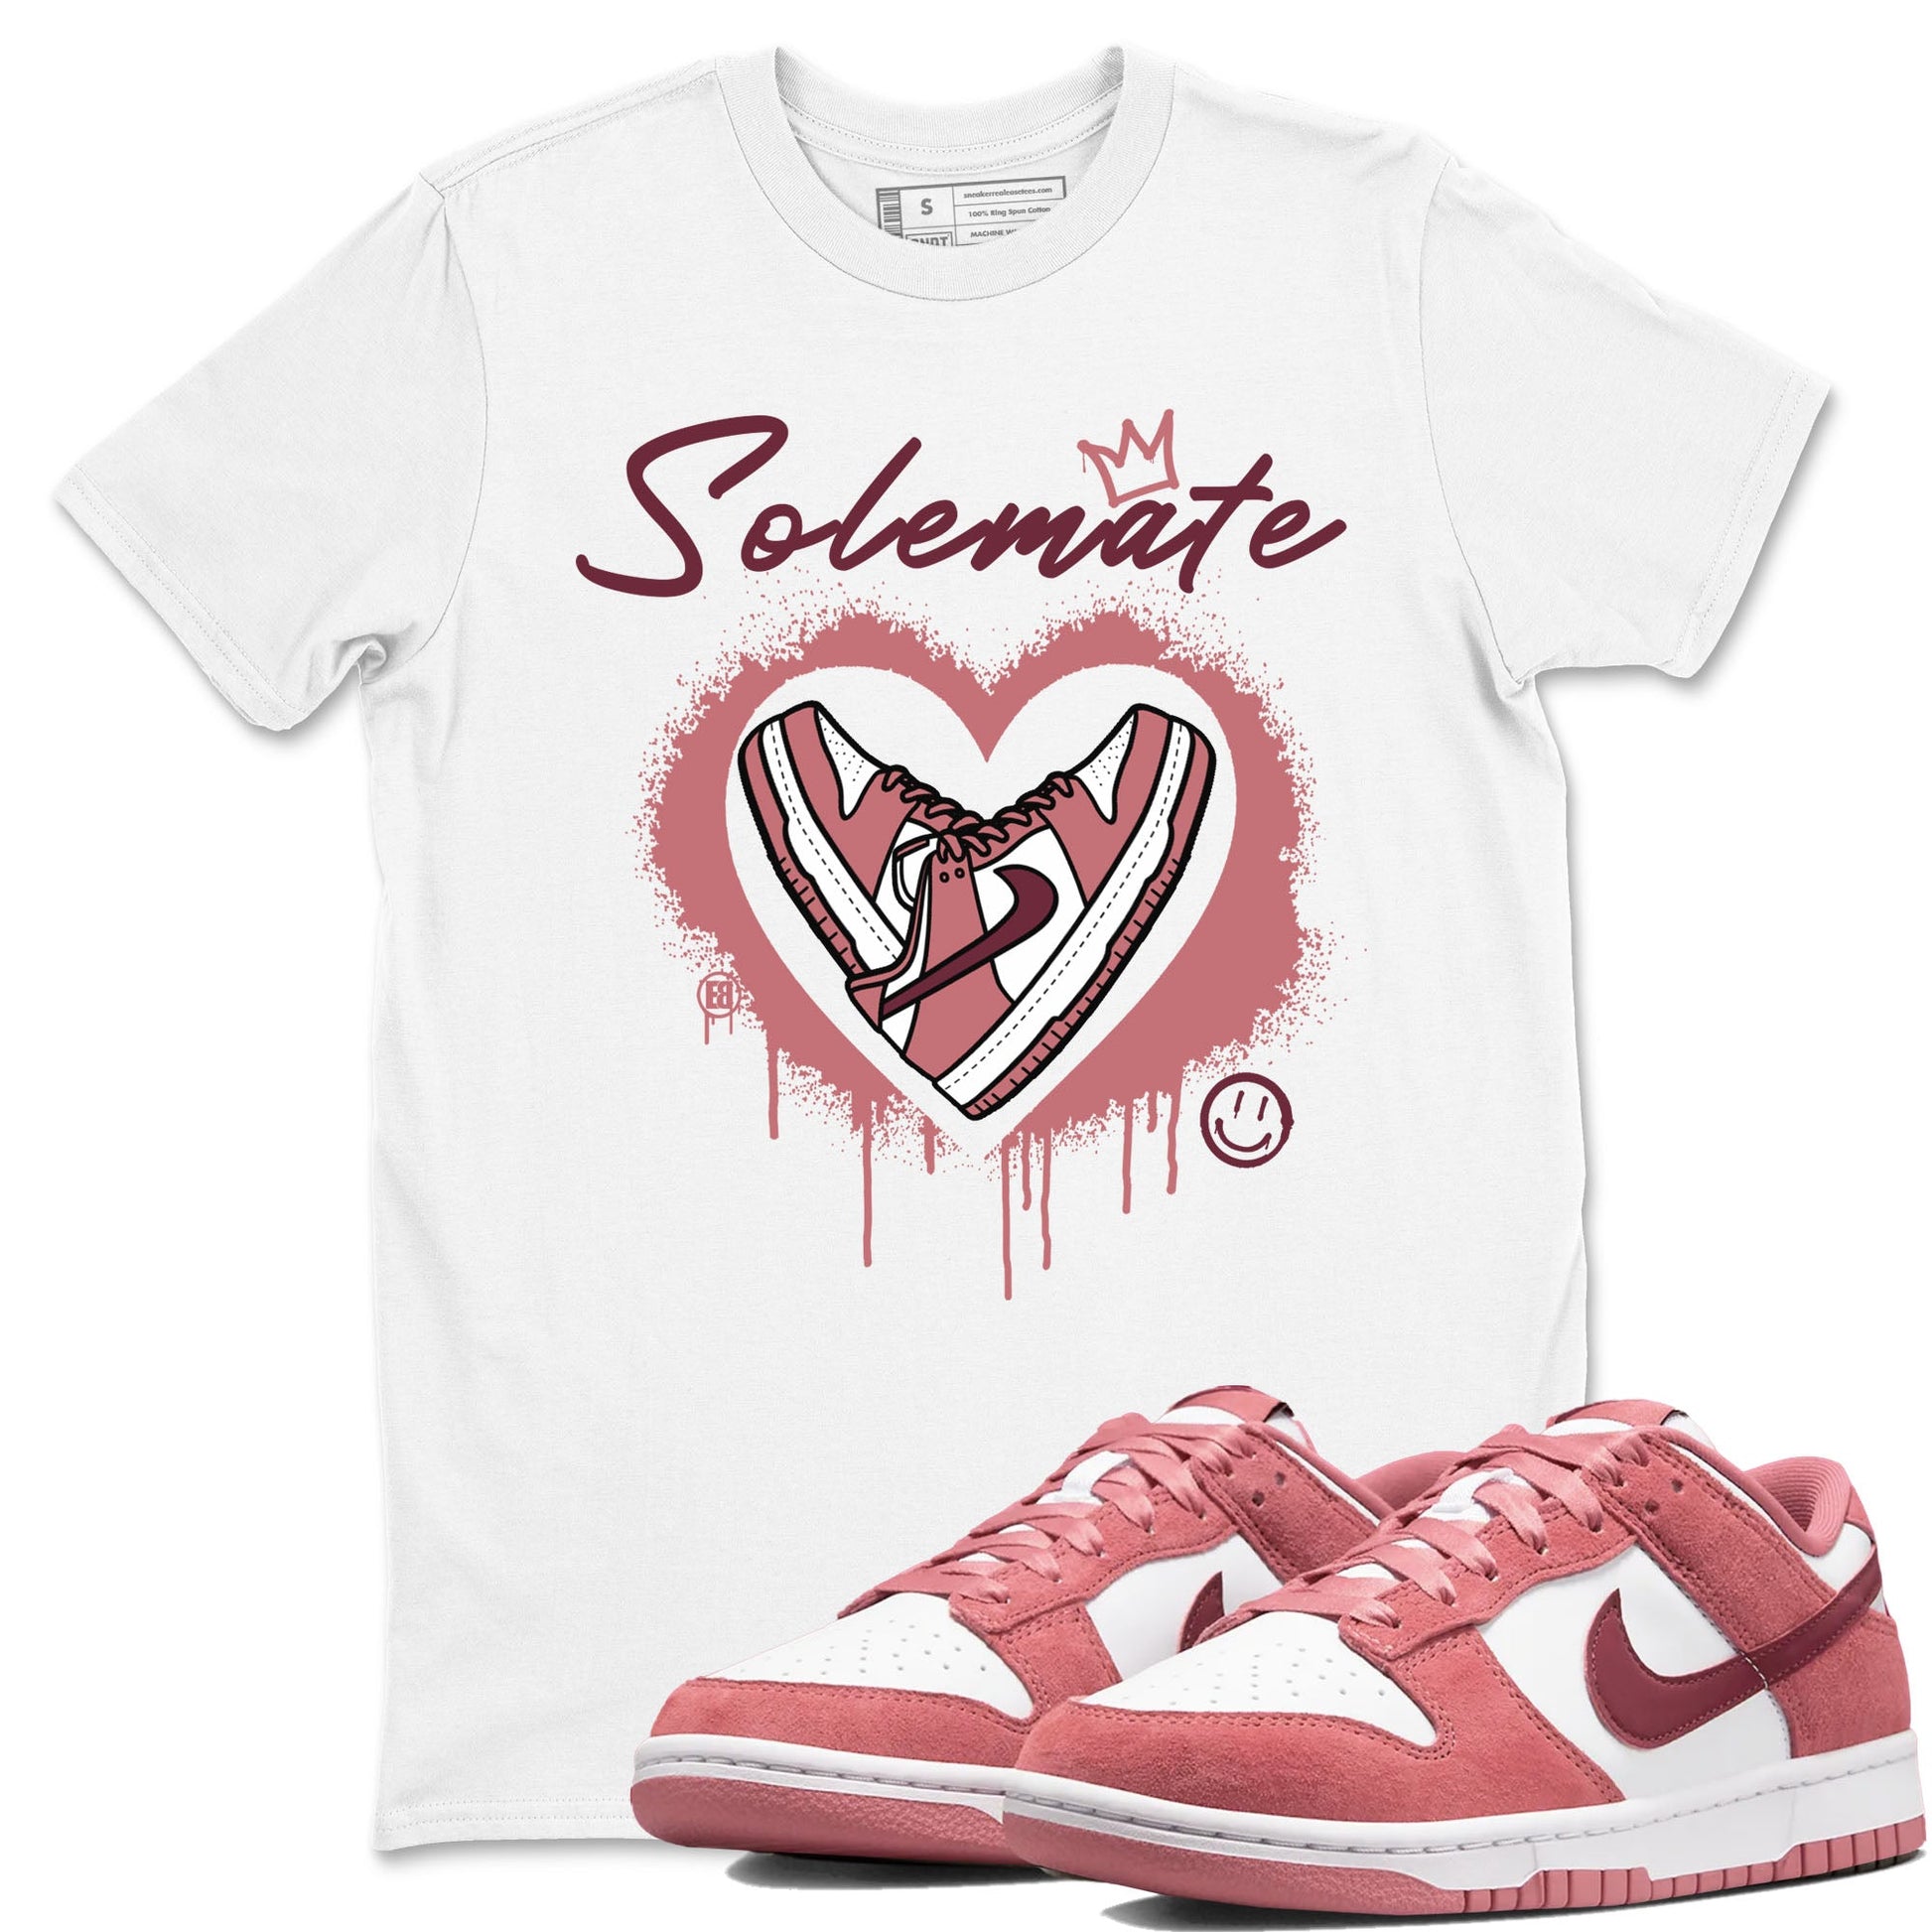 Solemate sneaker match tees to Dunk Valentine's Day street fashion brand for shirts to match Jordans SNRT Sneaker Tees Dunk Valentine's Day unisex t-shirt White 1 unisex shirt